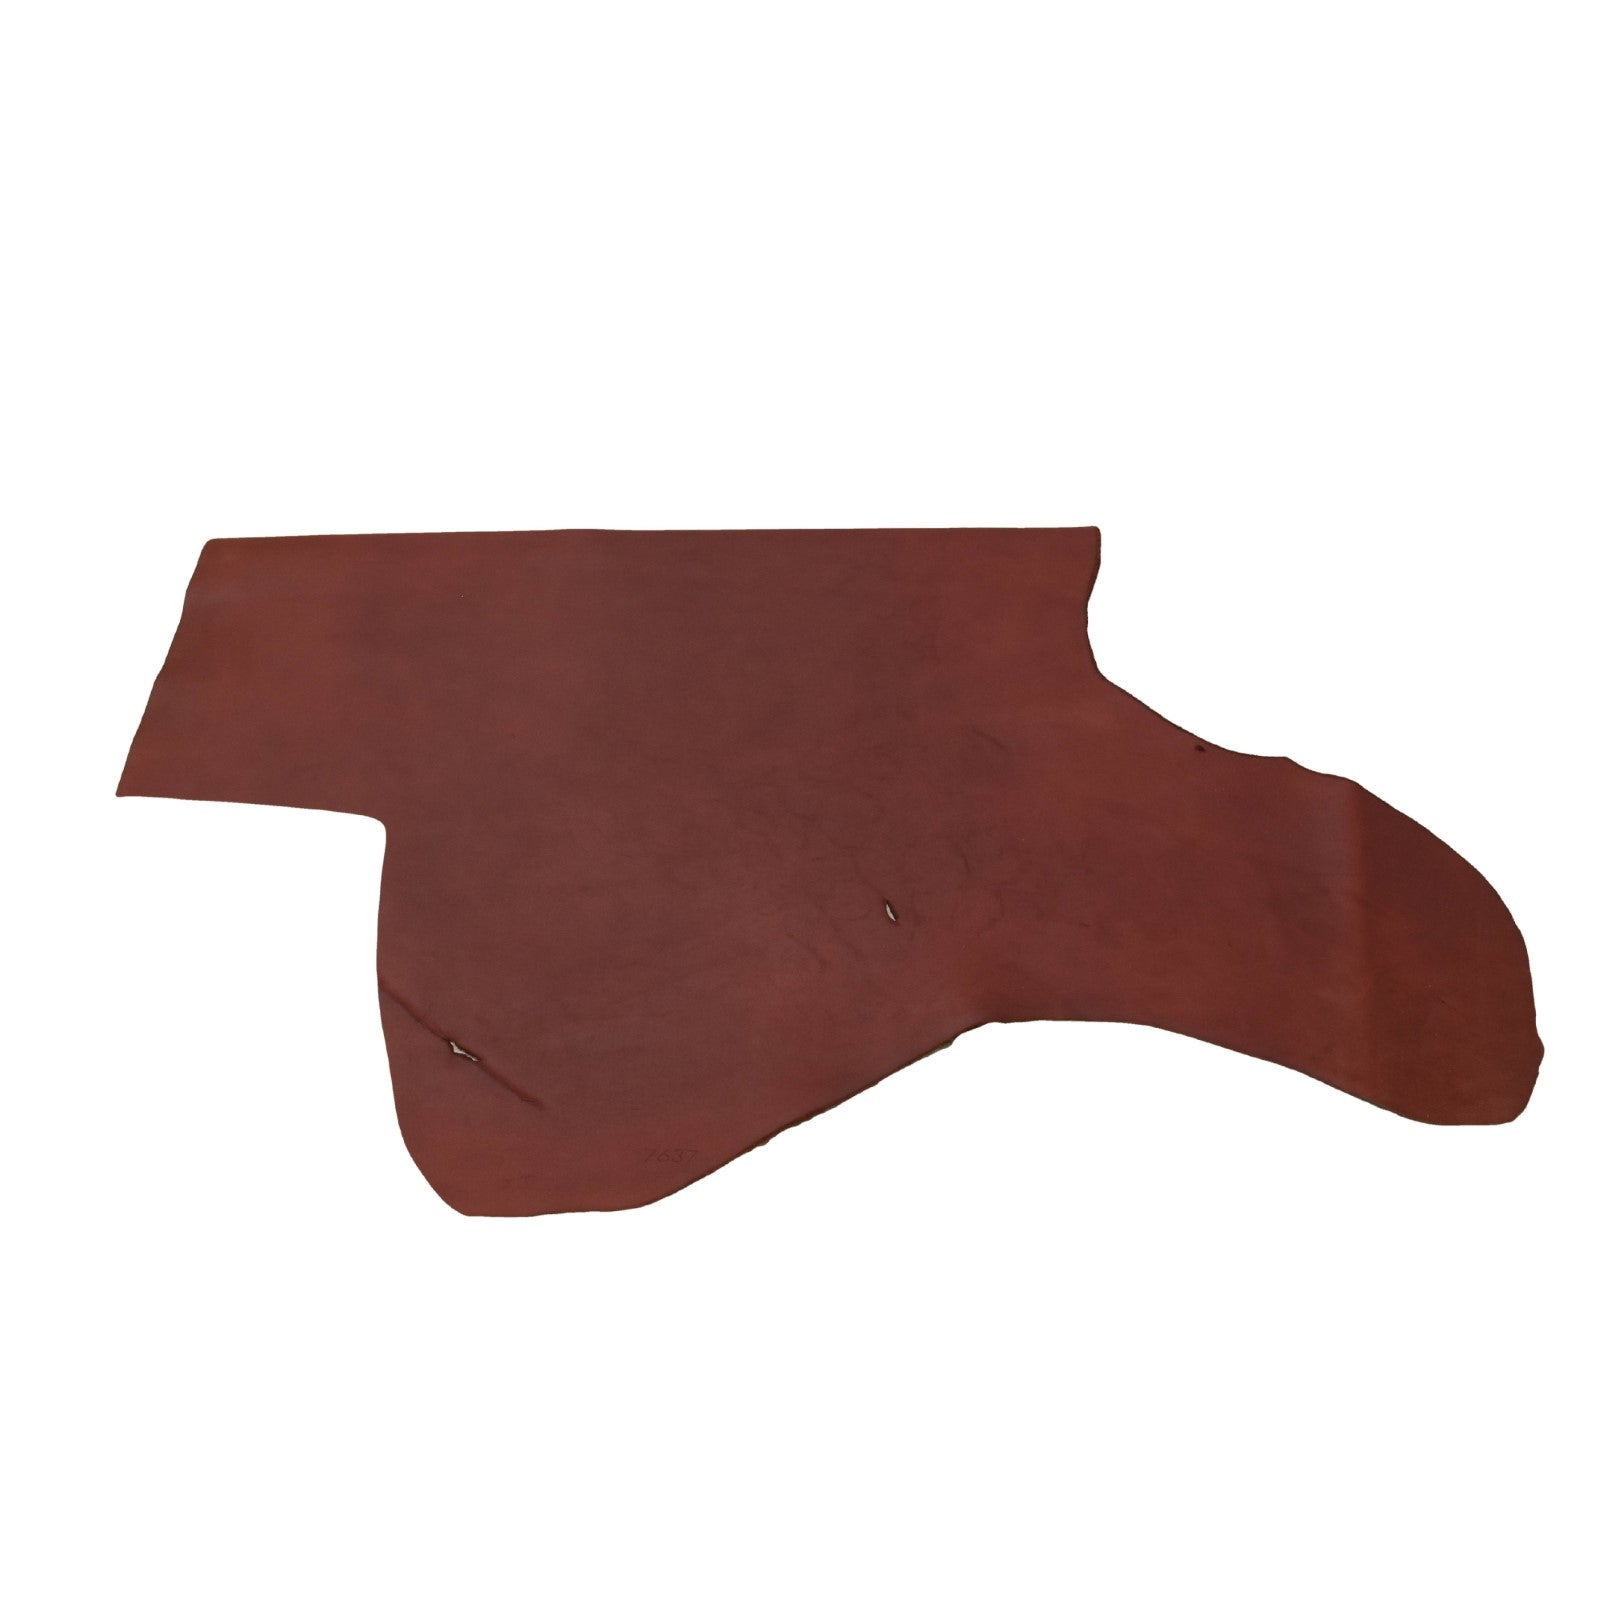 Light Burgundy Wildfire, Oil Tanned Sides, Summits Edge, 18-29 Sq Ft, 6.5 - 7.5 Sq Ft / Project Piece (Bottom) | The Leather Guy